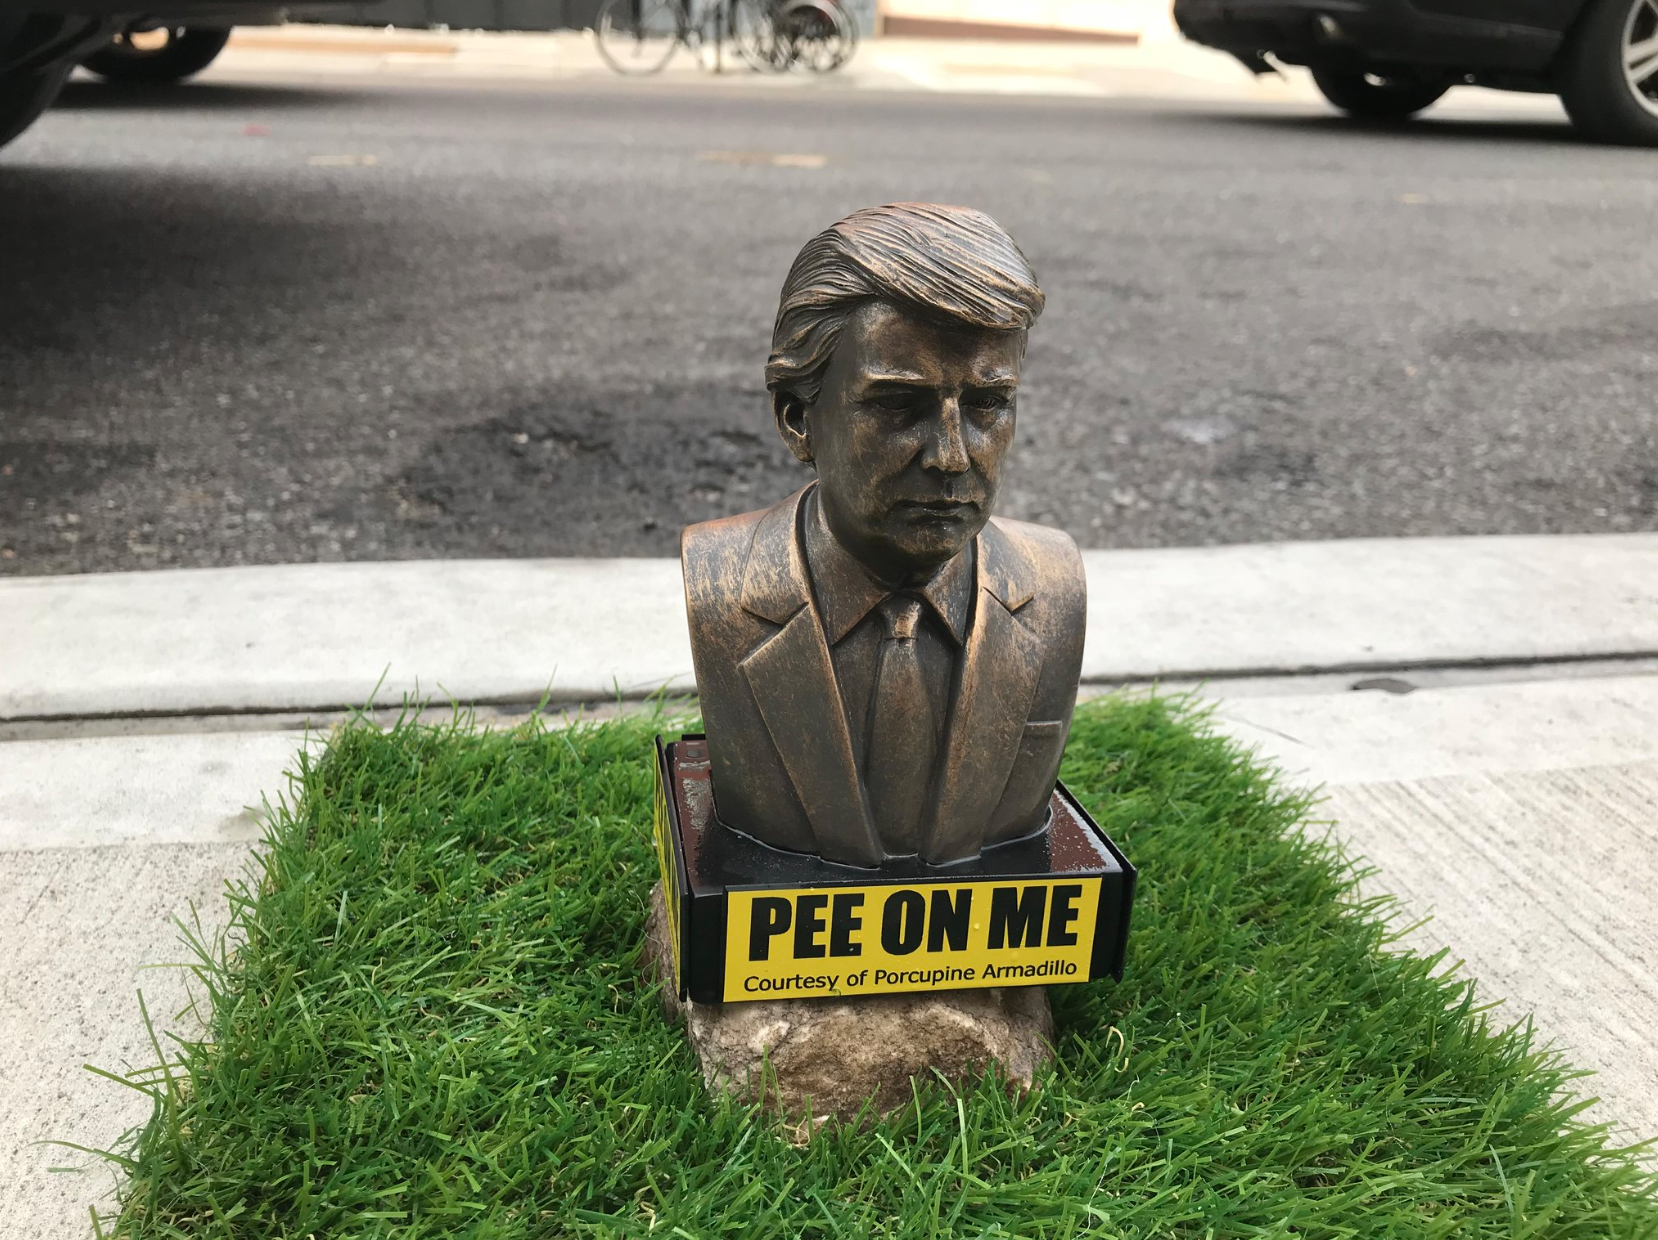 Are Trump “Pee On Me” Statues One Step Too Far?